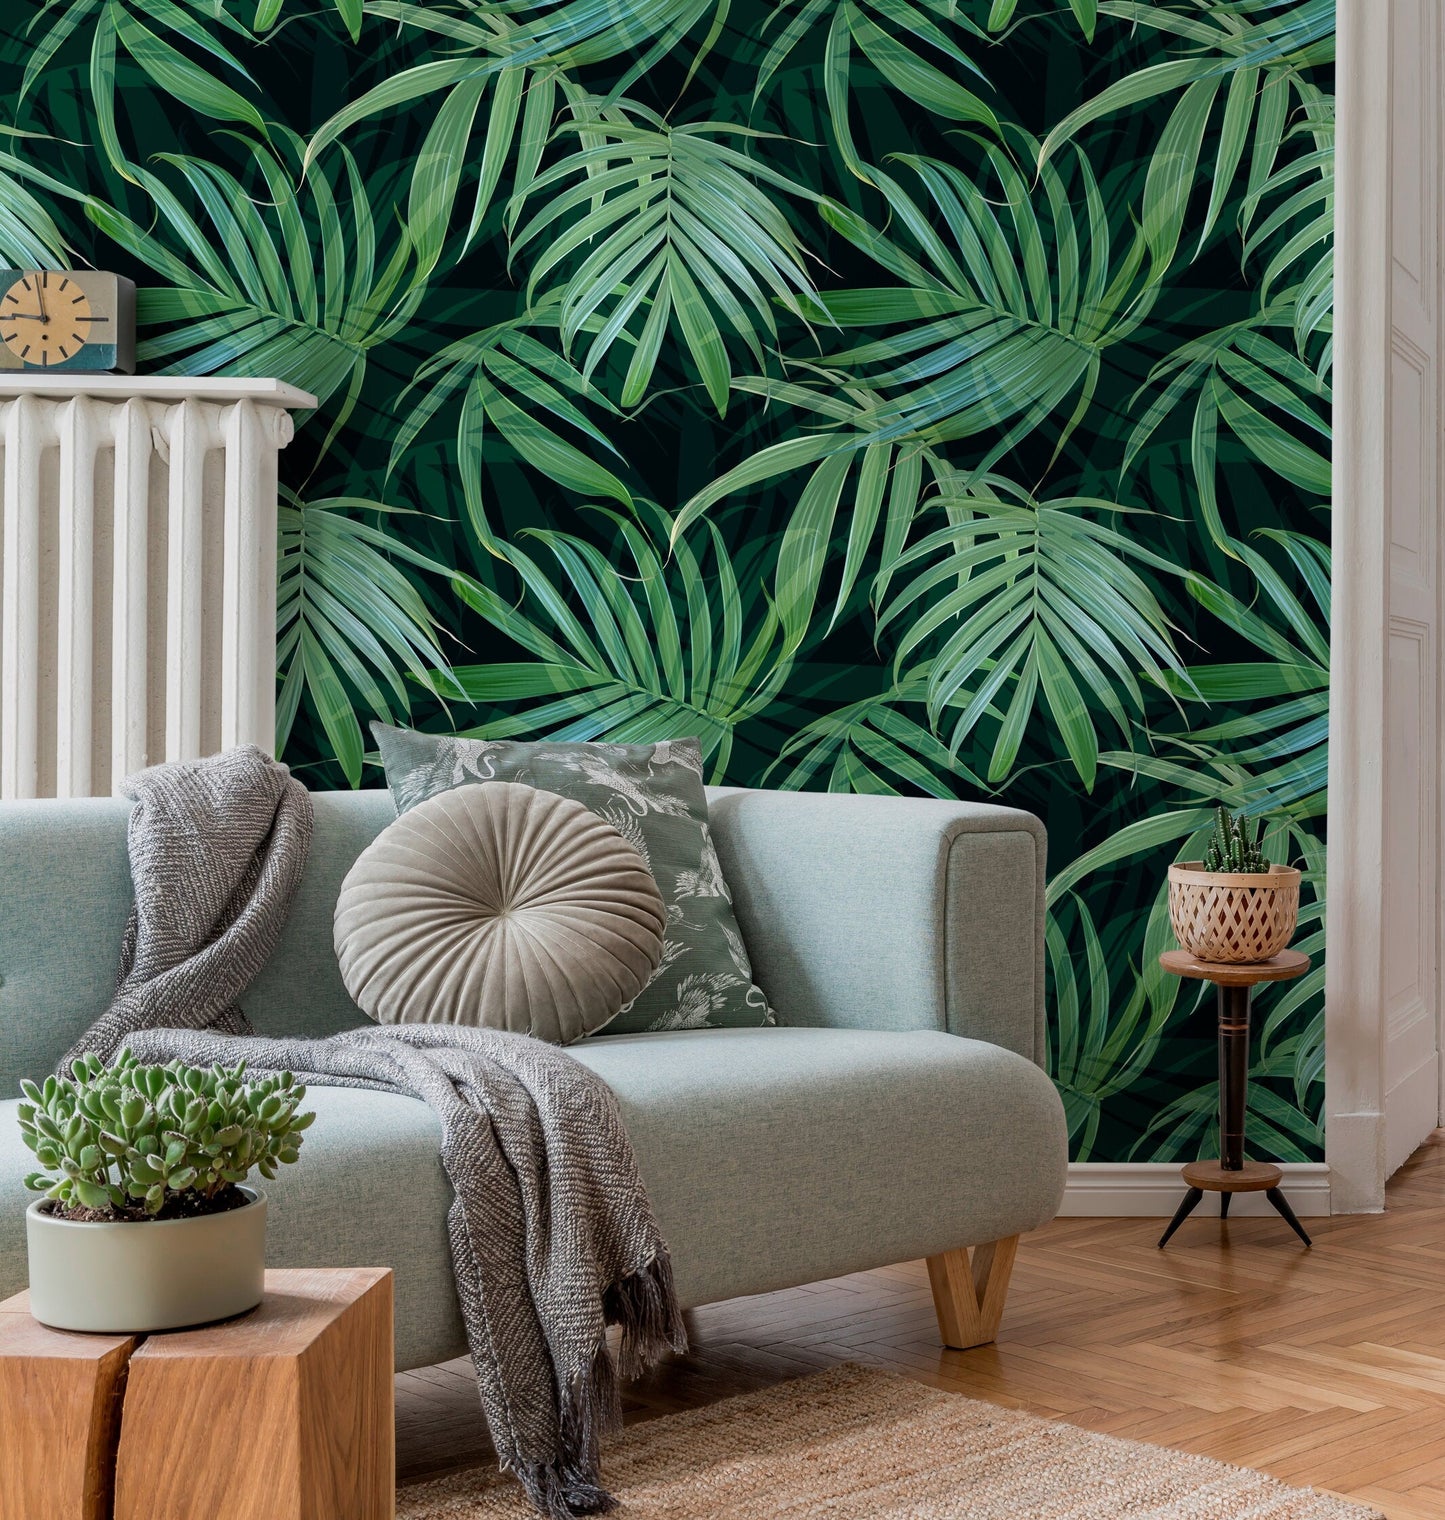 Wallpaper Peel and Stick Wallpaper Removable Wallpaper Home Decor Wall Art Wall Decor Room Decor / Tropical Green Leaves Wallpaper - C417